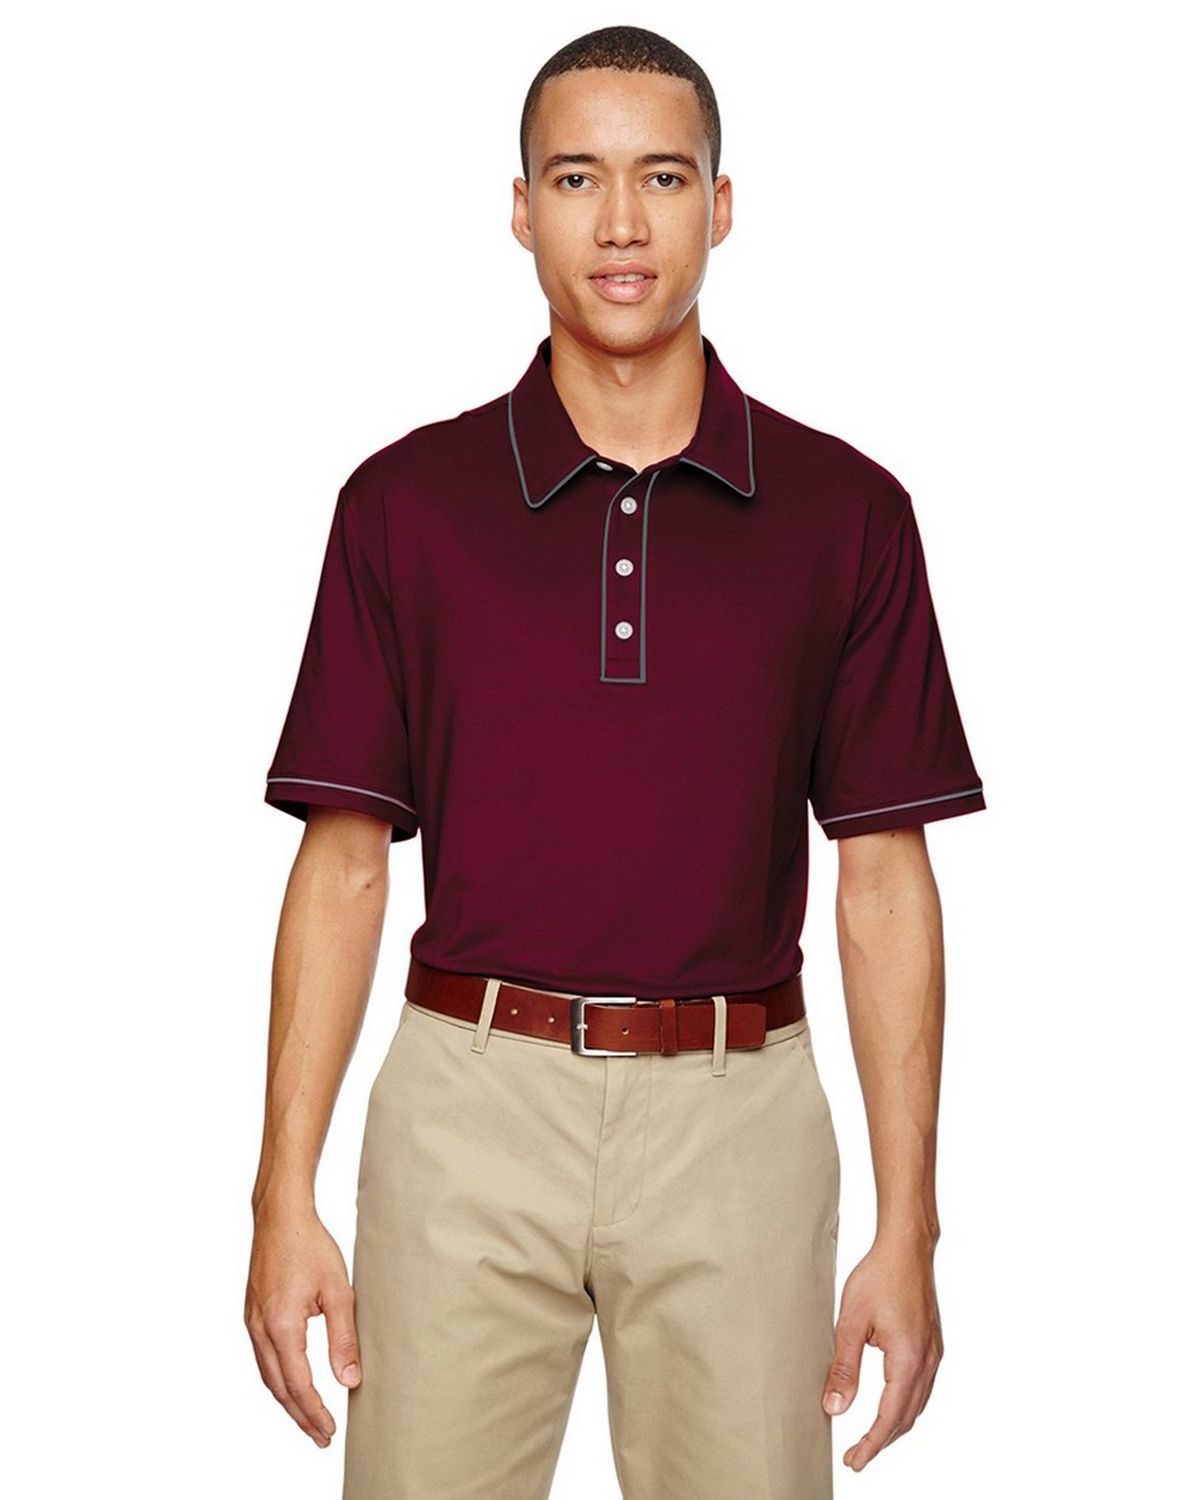 Adidas Golf A125 Men's Puremotion Piped Polo